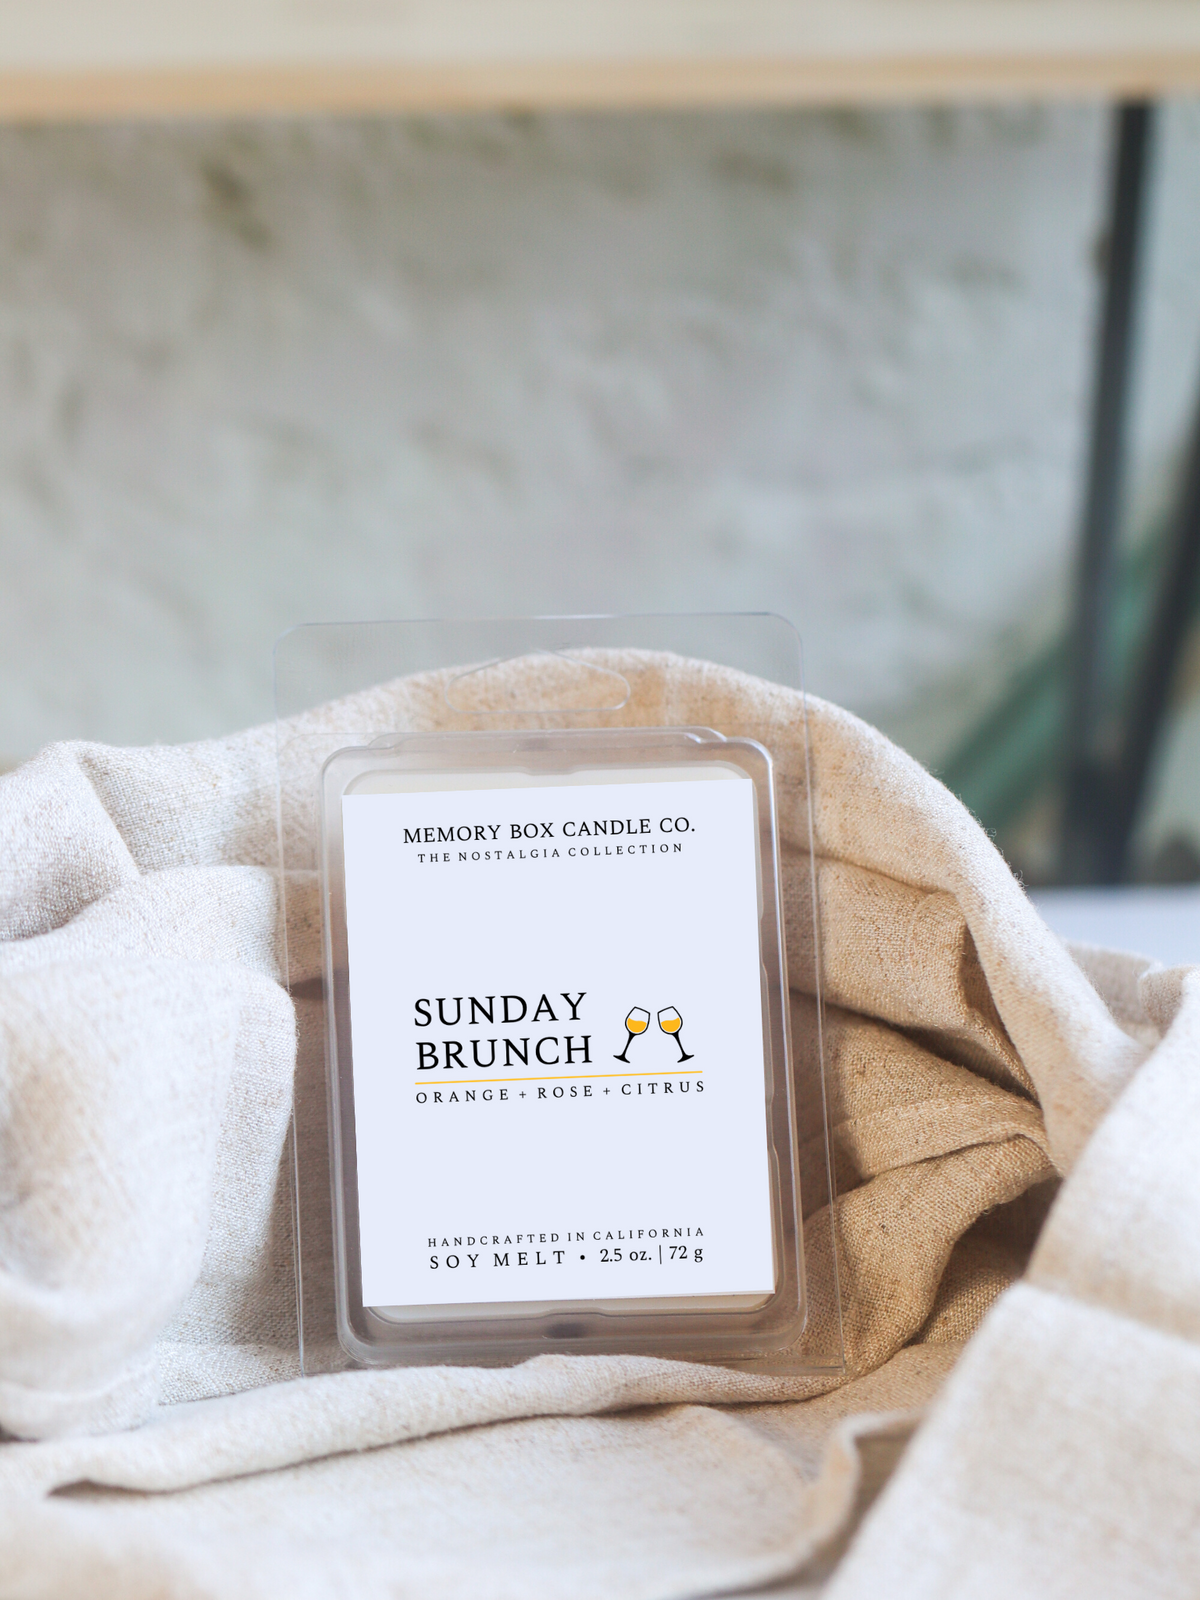 Wax Melts – Ramsey Ranch Candle Co.